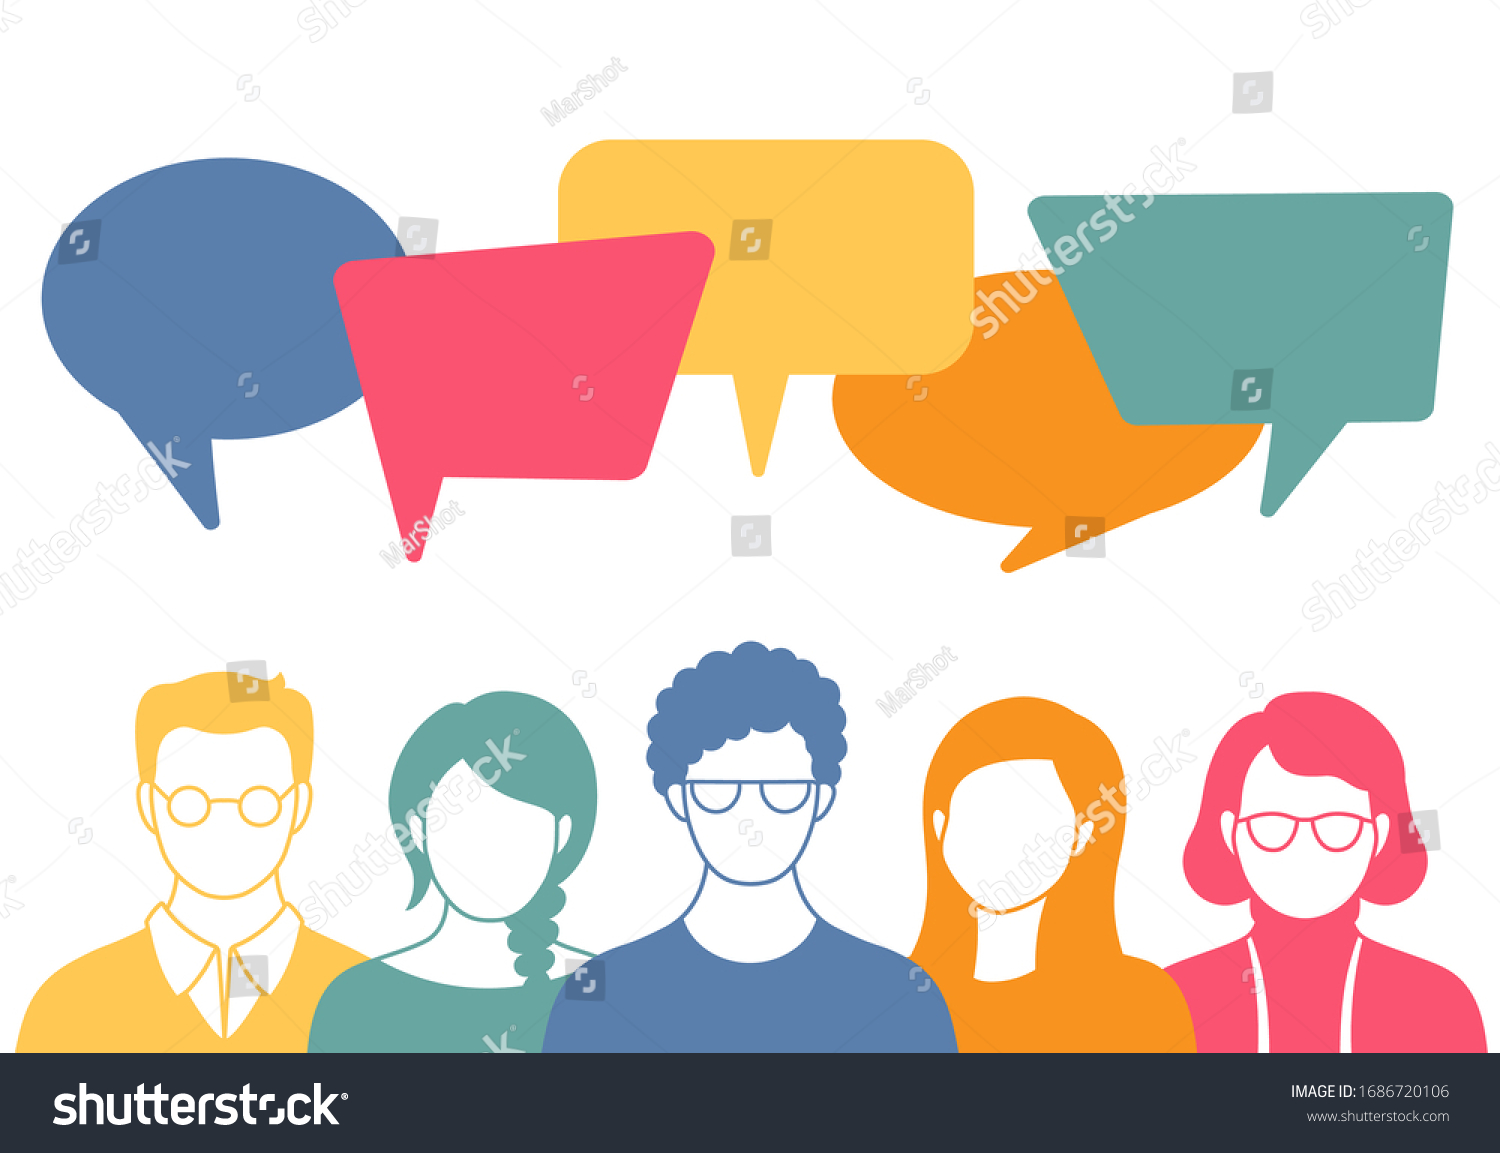 SVG of People avatars with speech bubbles. Men and woman communication, talking llustration. Coworkers, team, thinking, question, idea, brainstorm concept. svg